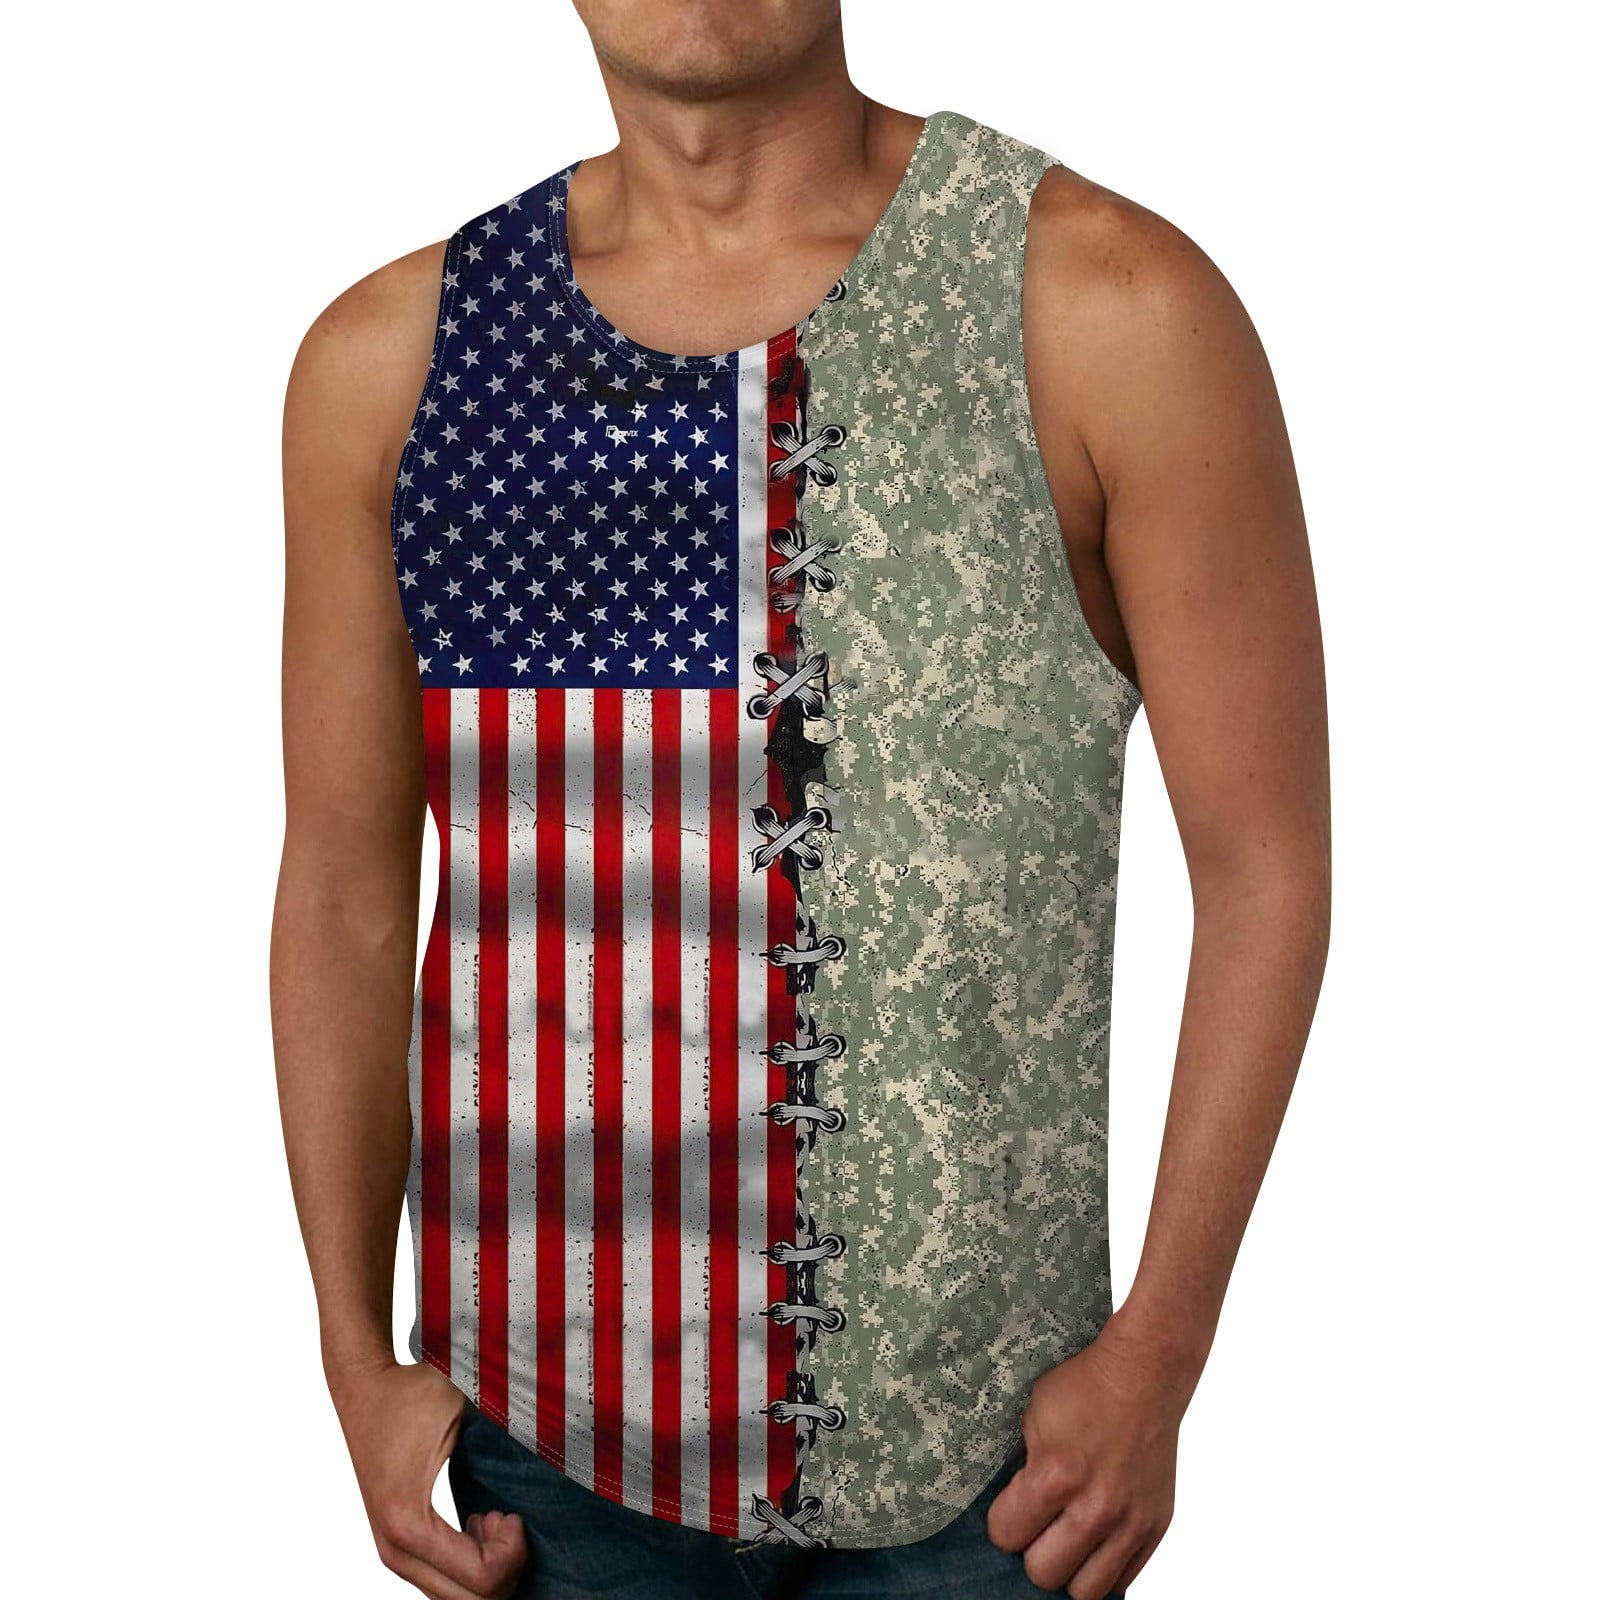 Mohiass Patriotic Crew Neck Tank Tops for Men Independence Day Stars ...